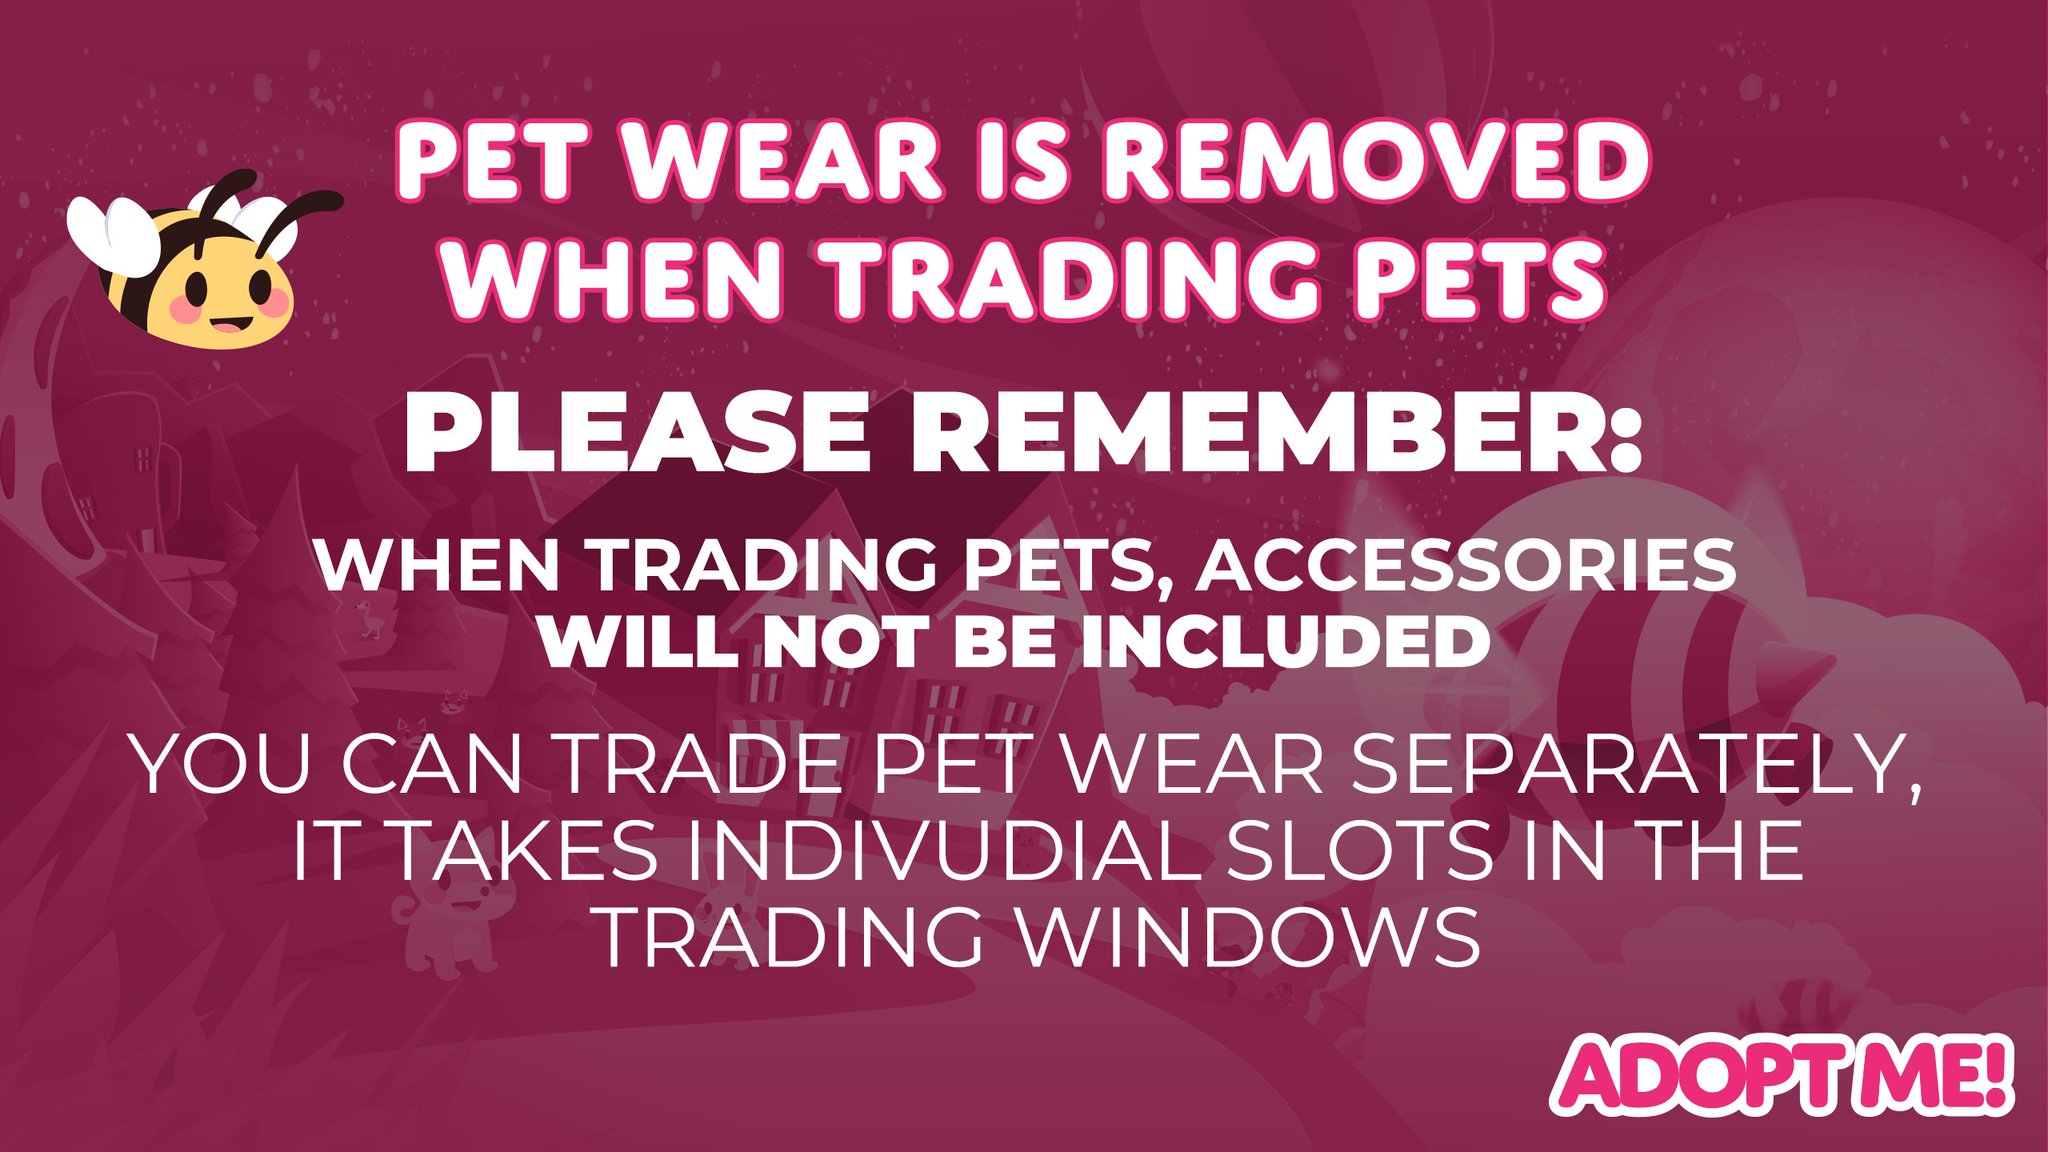 Adopt Me On Twitter Psa When Trading Pet Wear Is Removed From The Pet You Can Trade Pet Wear Separately And It Takes Individual Slots In The Trading Windows You Can T Trade - roblox trading window